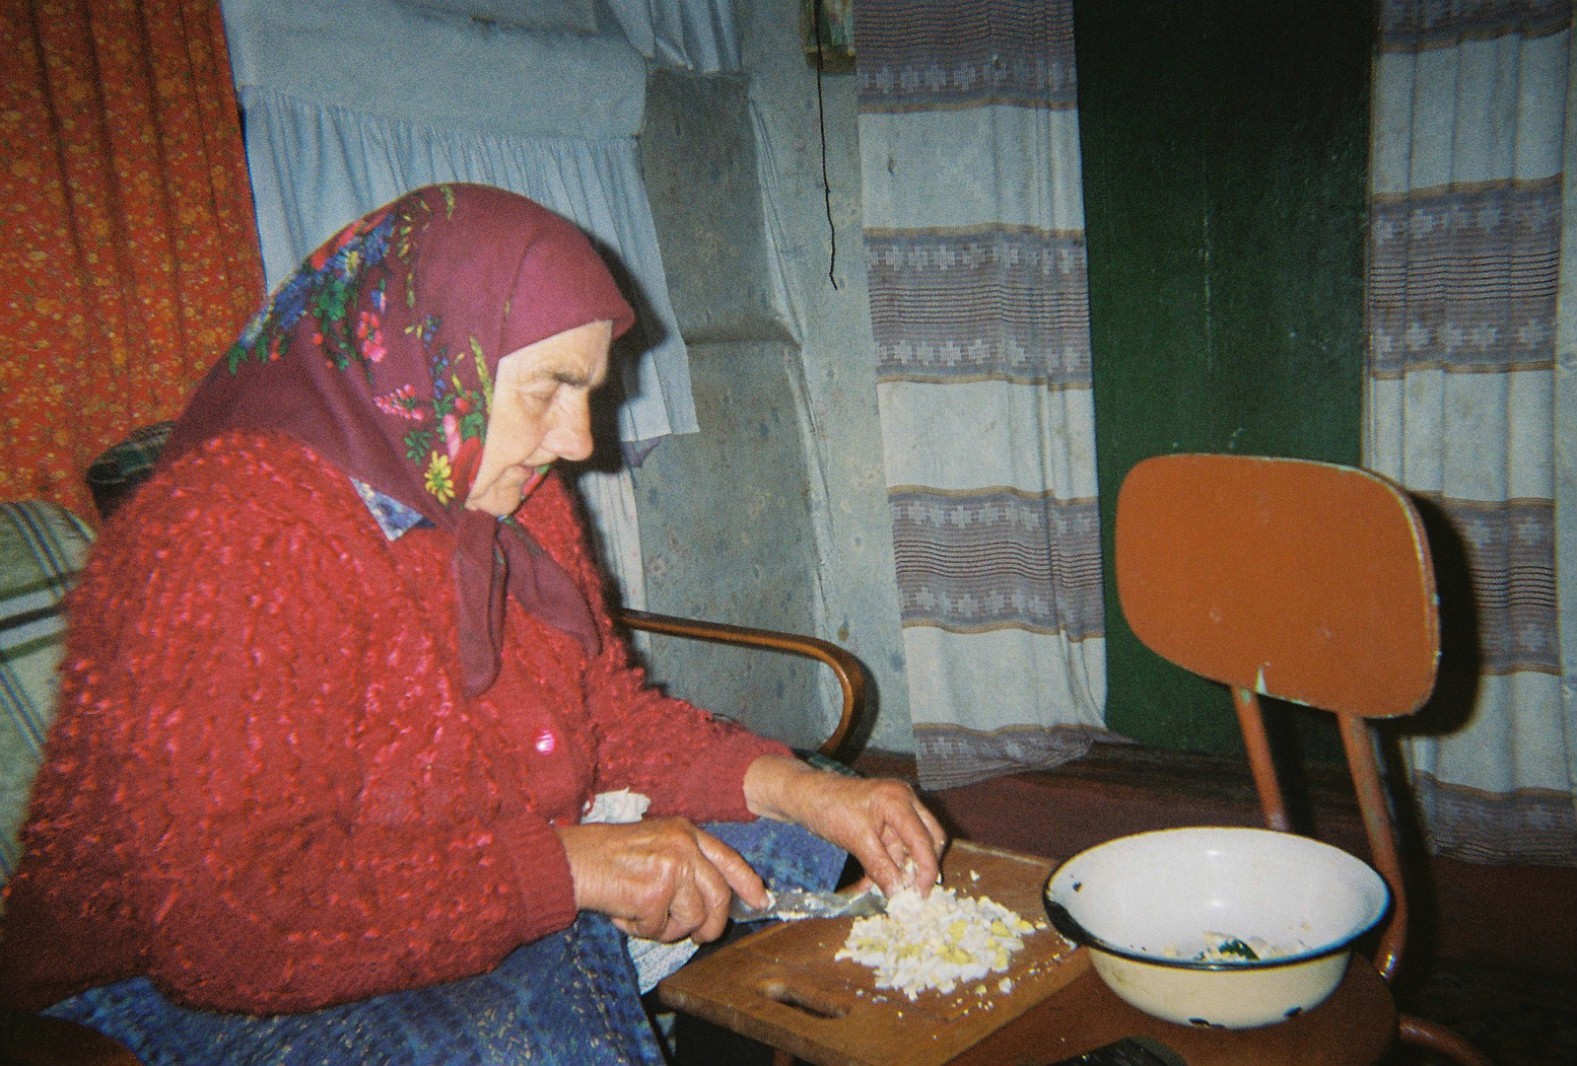 An elderly lady prepares home-grown food in her home near Chernobyl